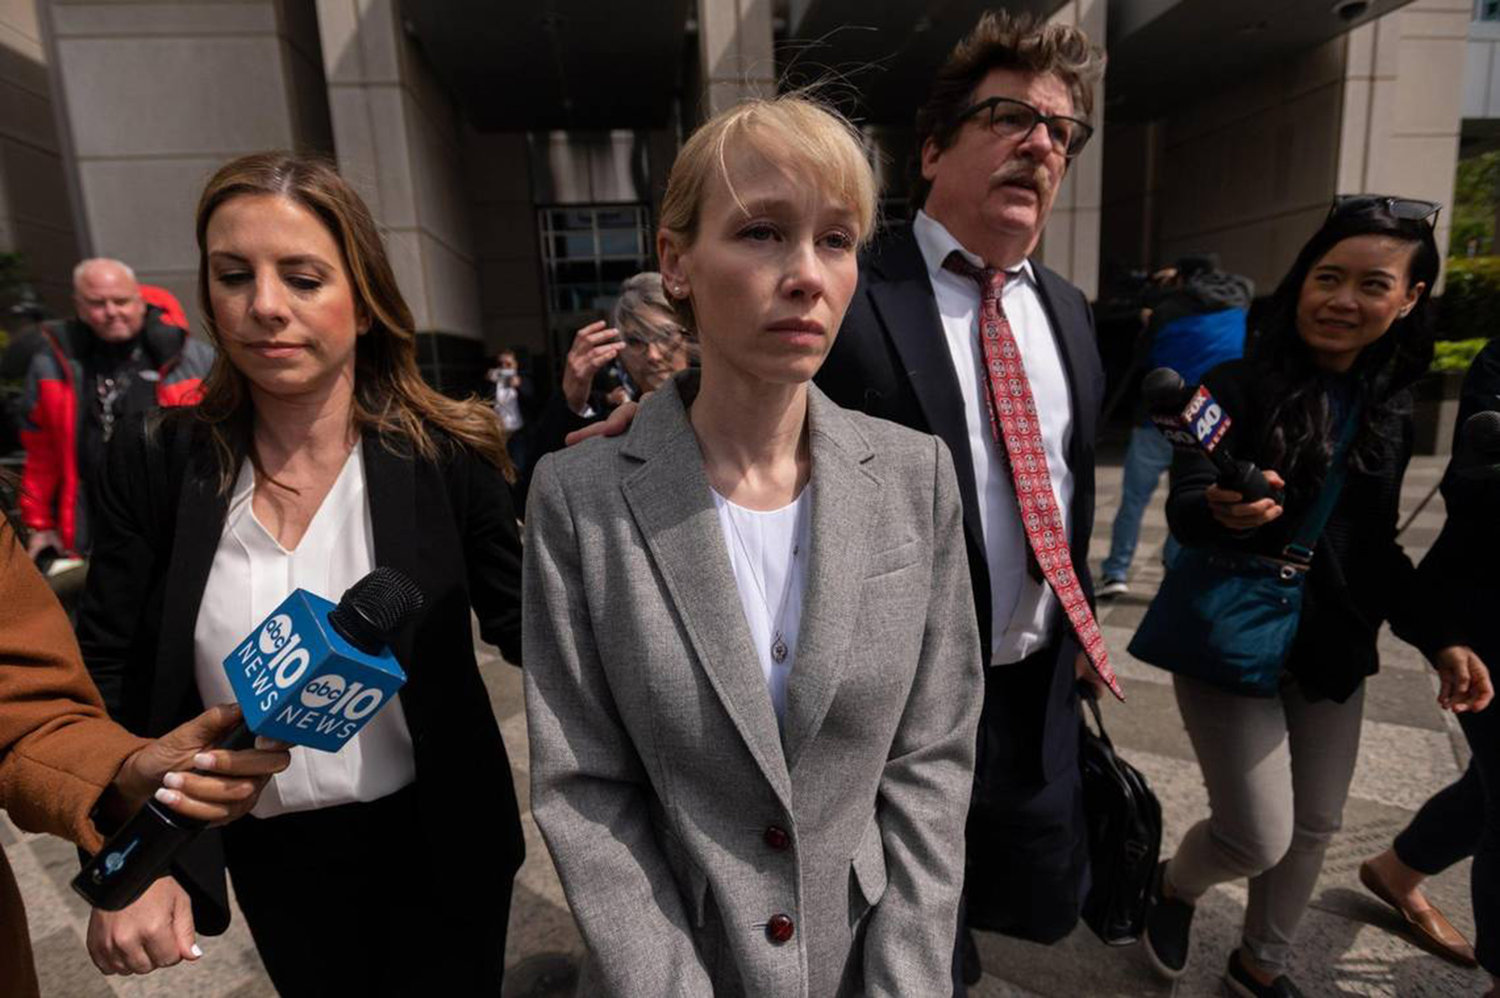 Sherri Papini, center, leaves with attorney William Portanova after her arraignment at the Robert T. Matsui U.S. Courthouse in Sacramento, California, on April 13, 2022. She was charged with faking her own kidnapping in 2016. (Paul Kitagaki Jr./The Sacramento Bee/TNS)